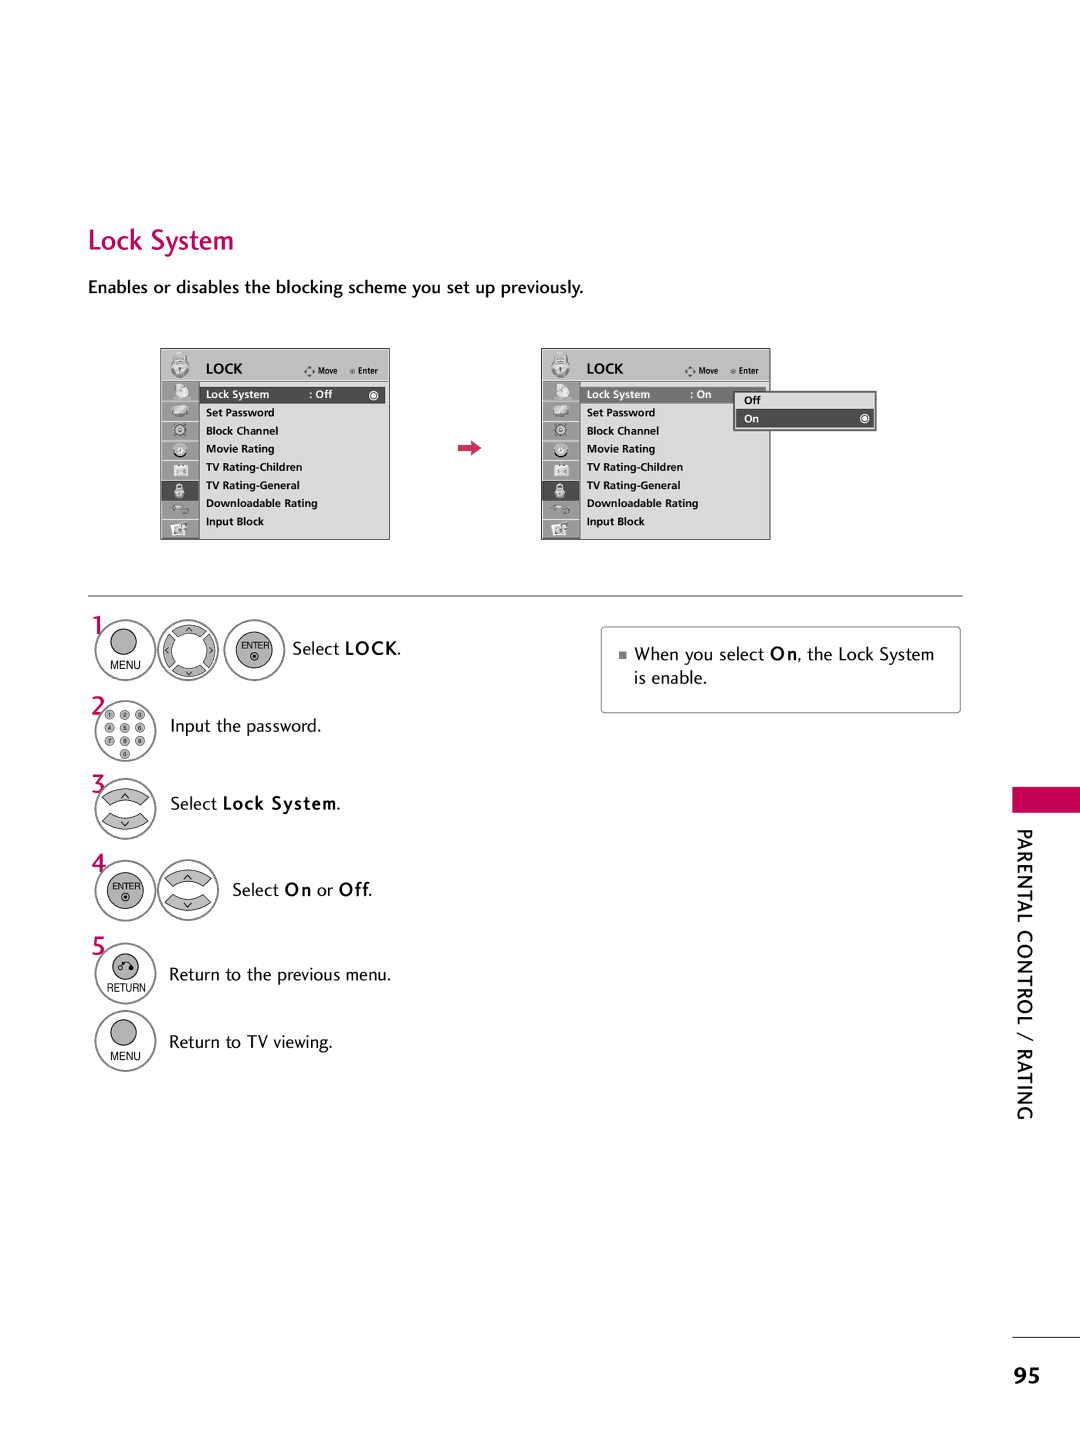 LG Electronics 47LH300C, 42LH300C, 42LH200C, 37LH200C, 26LH200C, 26LH210C Is enable, Select Lock System, Lock System Off 